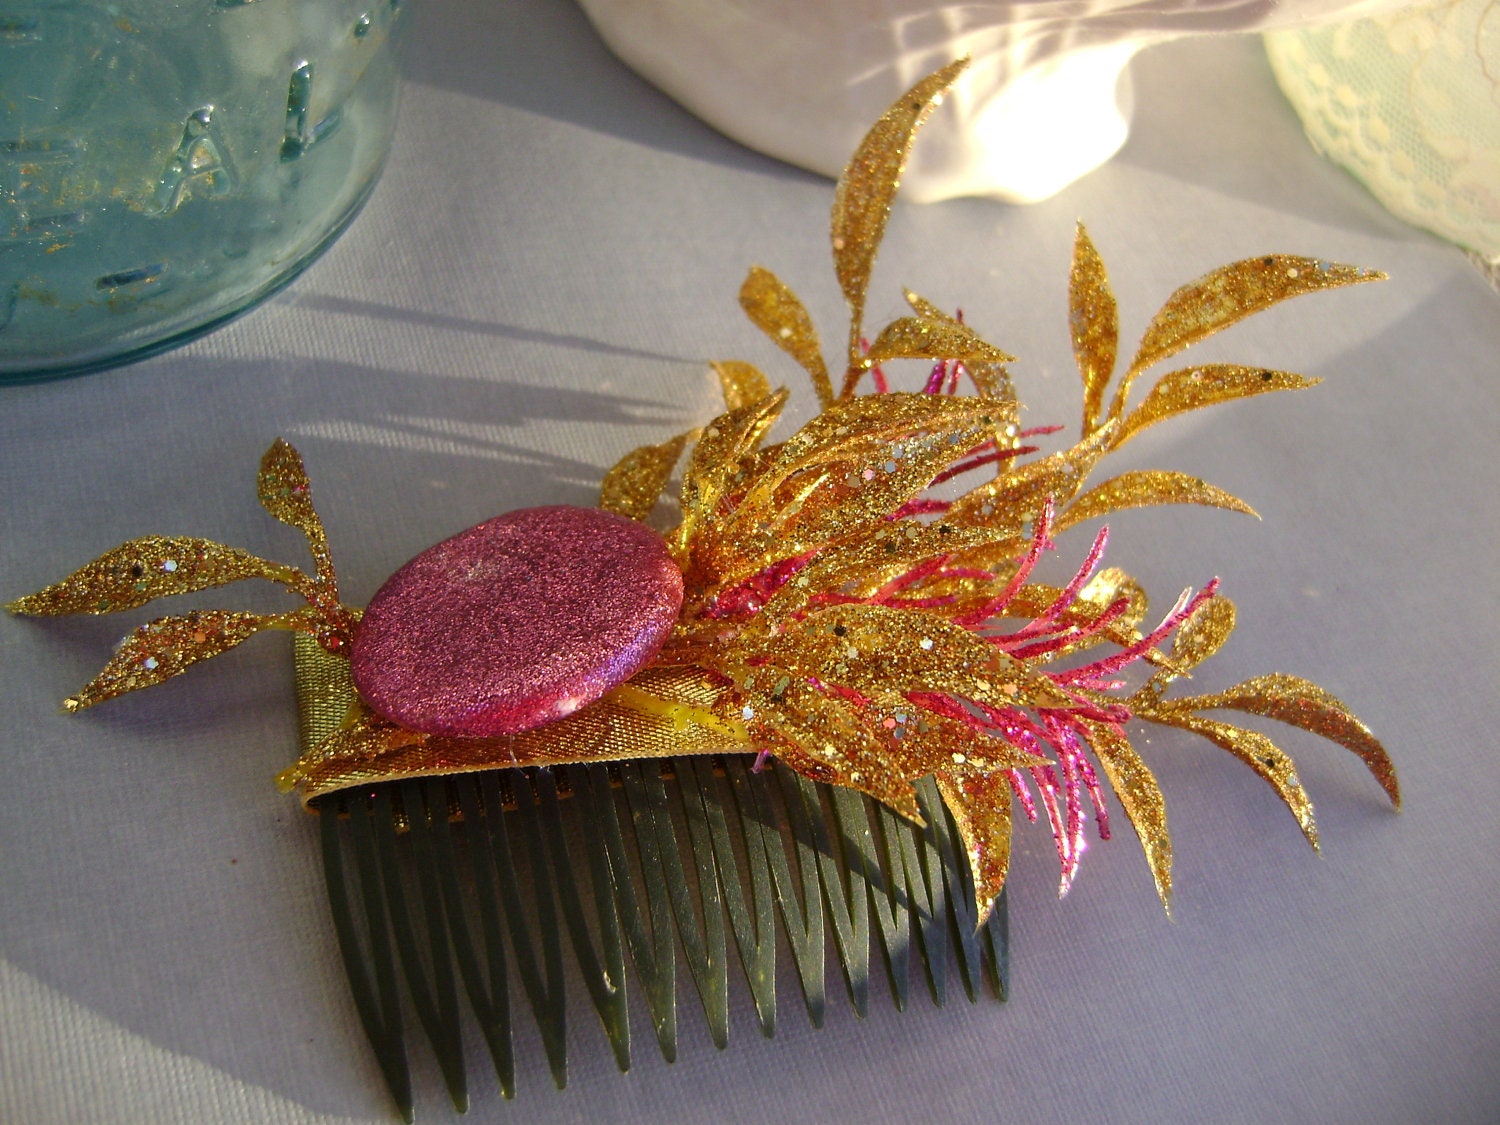 Gorgeous glittered hair comb in pink and gold - LoveYourQueen